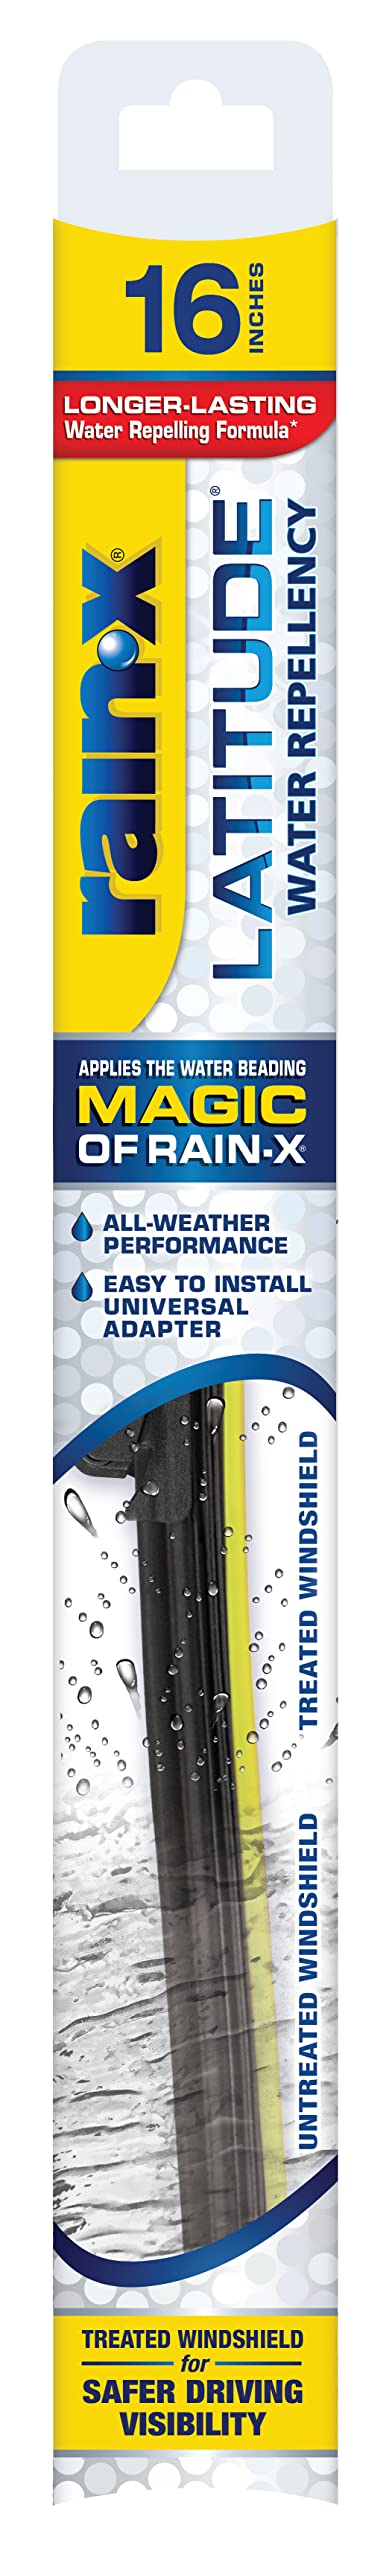 Rain-X 5079274-2 Latitude 2-In-1 Water Repellent Wiper Blades, 16 Inch (Pack Of 1), Automotive Replacement Windshield Wiper Blades With Patented Rain-X Water Repellency Formula